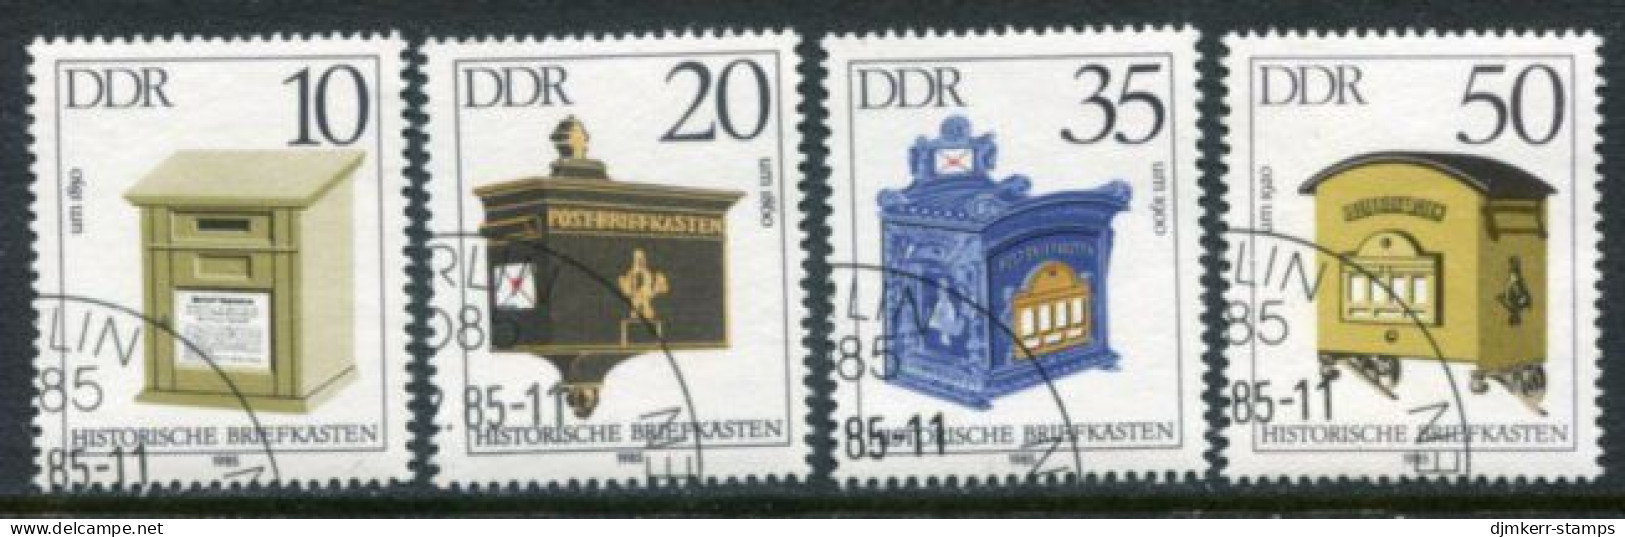 DDR 1985 Histpric Letterboxes Singles Used .  Michel 2924-27 - Usados